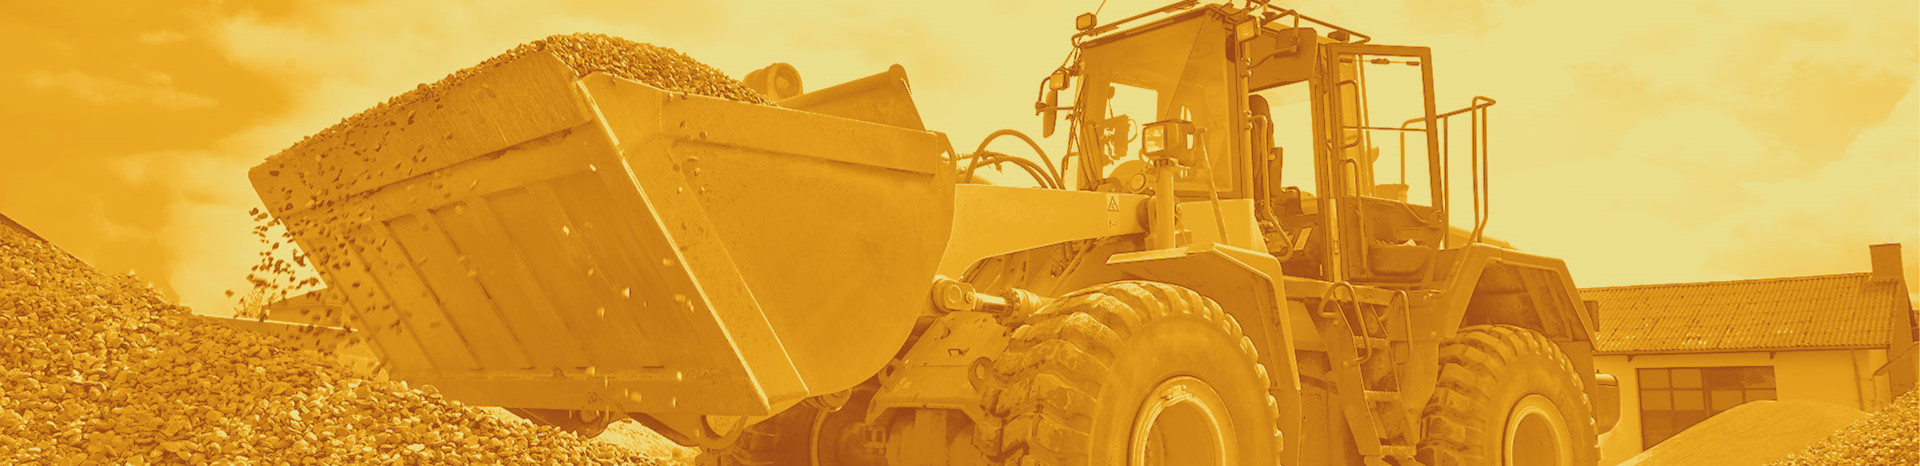 Solutions for Off-Highway Equipment